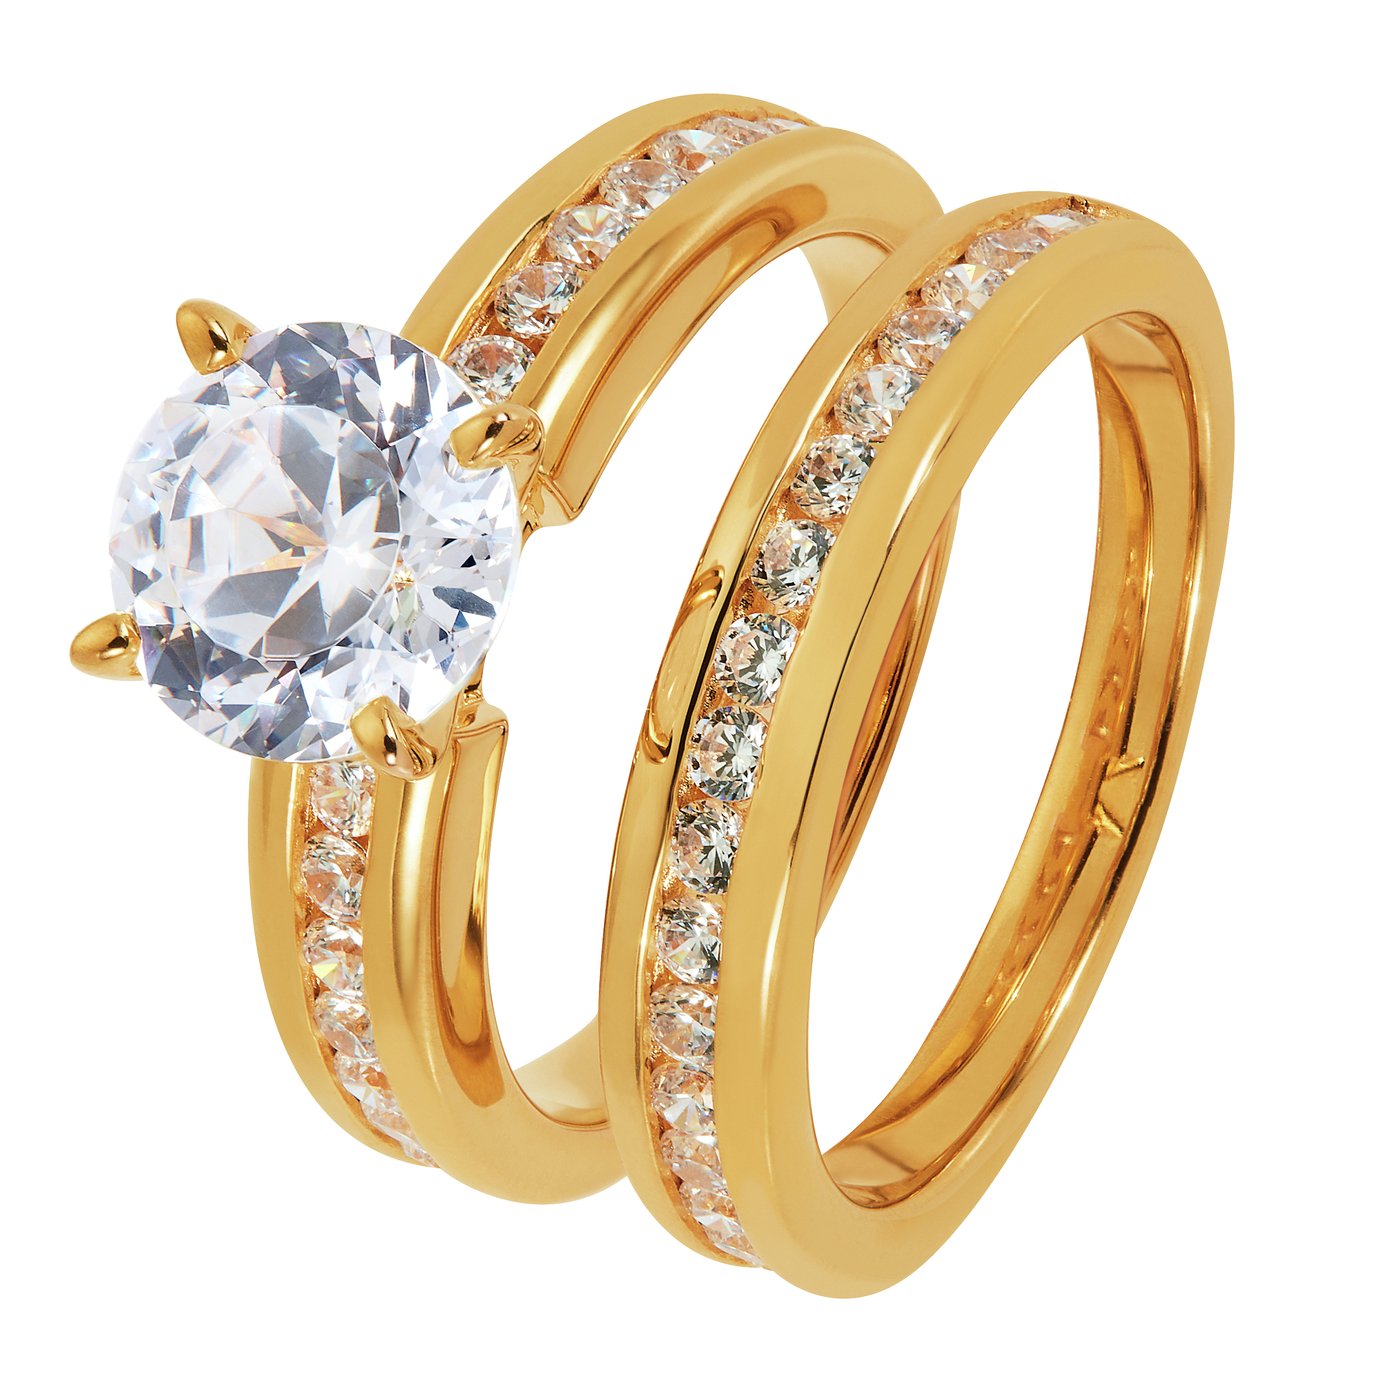 Revere 9ct Gold Plated Cubic Zirconia Bridal Ring Set - L